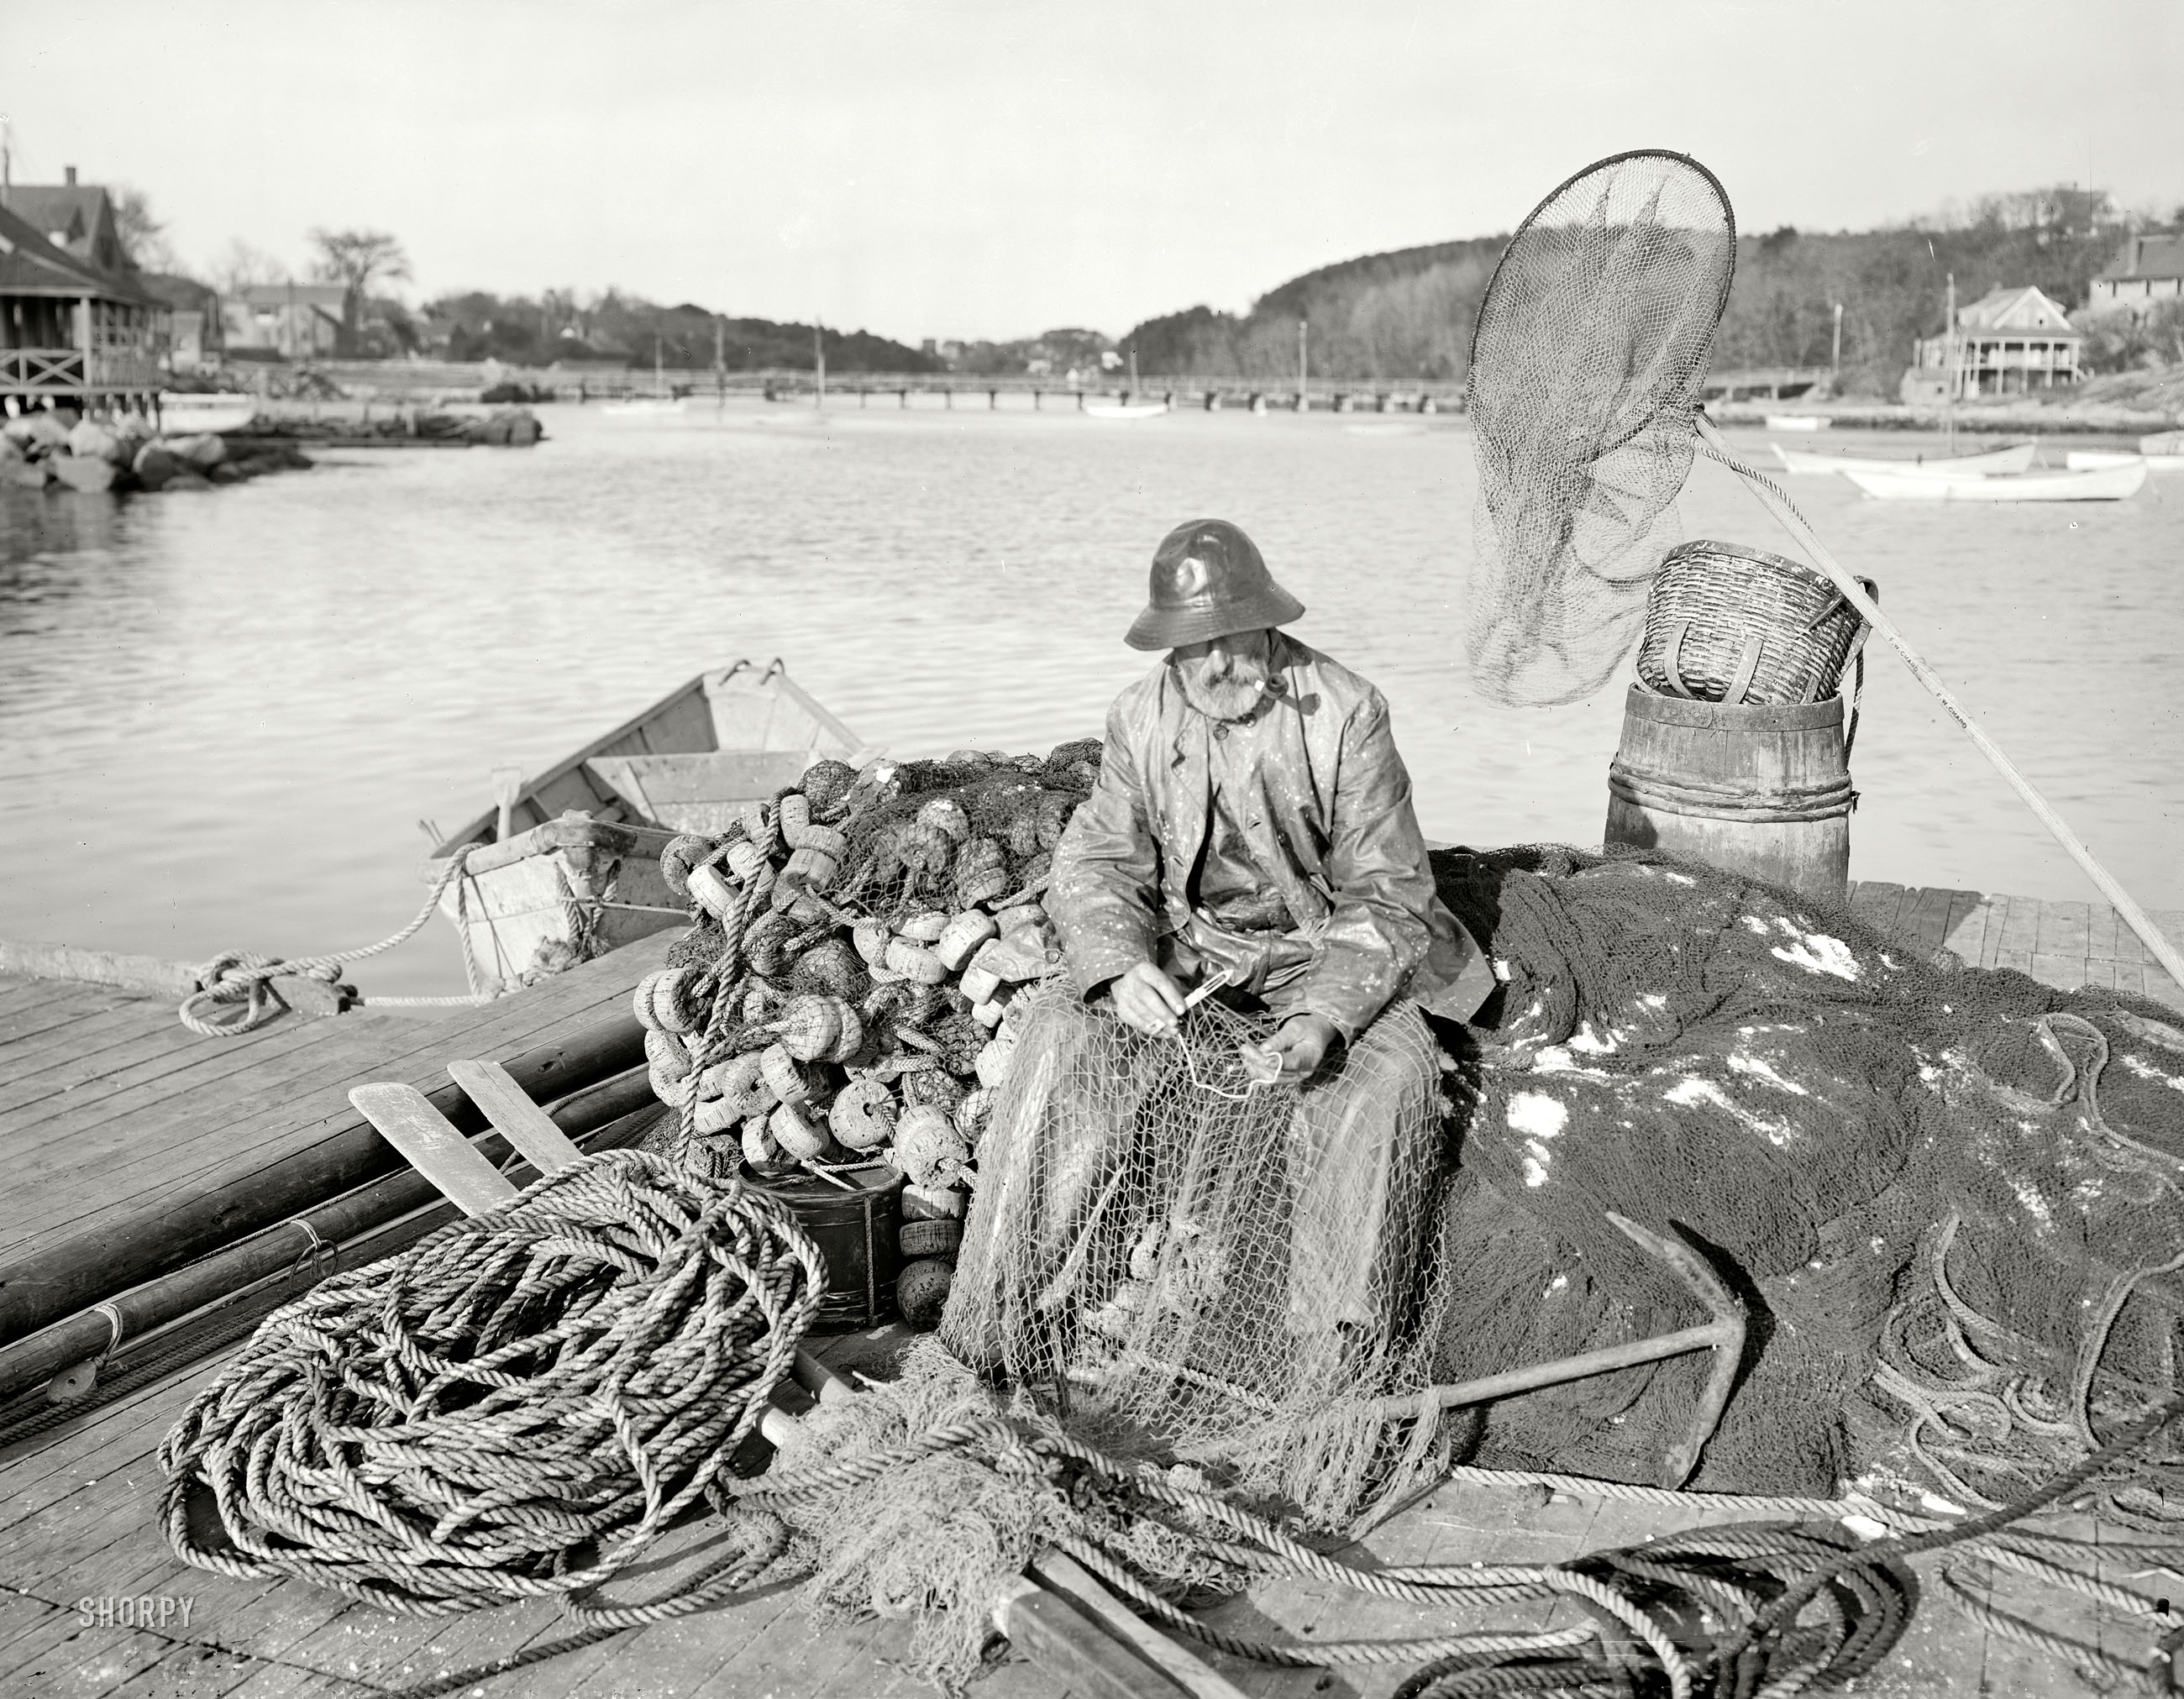 Gloucester, Massachusetts, circa 1905. "Fisherman getting ready for a trip." 8x10 inch dry plate glass negative, Detroit Publishing Company. View full size.